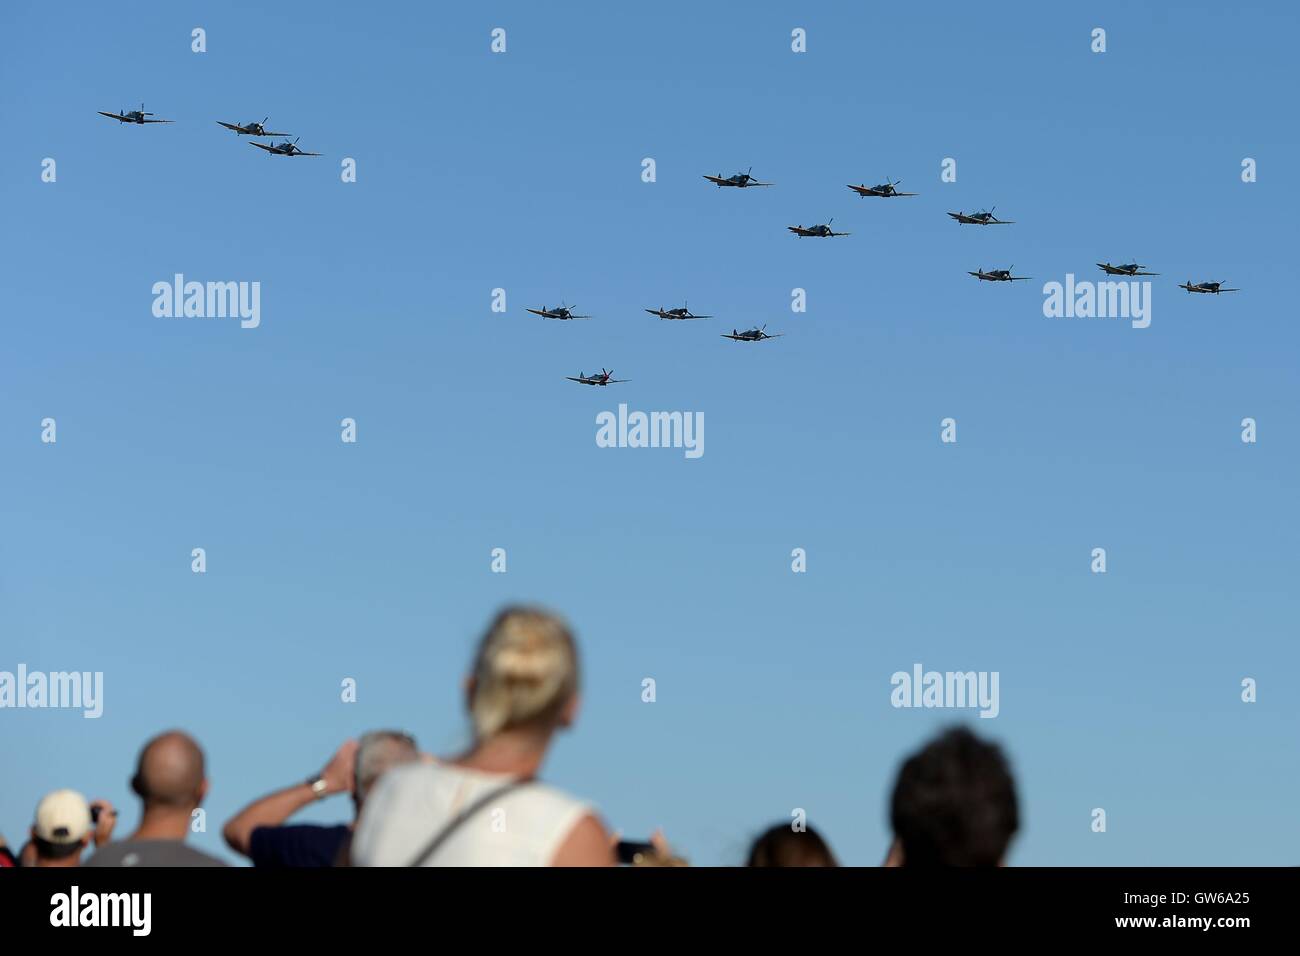 Fourteen Supermarine Spitfires take to the skies during The Duxford Air Show 2016 at The Imperial War Museum in Duxford, Cambridgeshire. Stock Photo